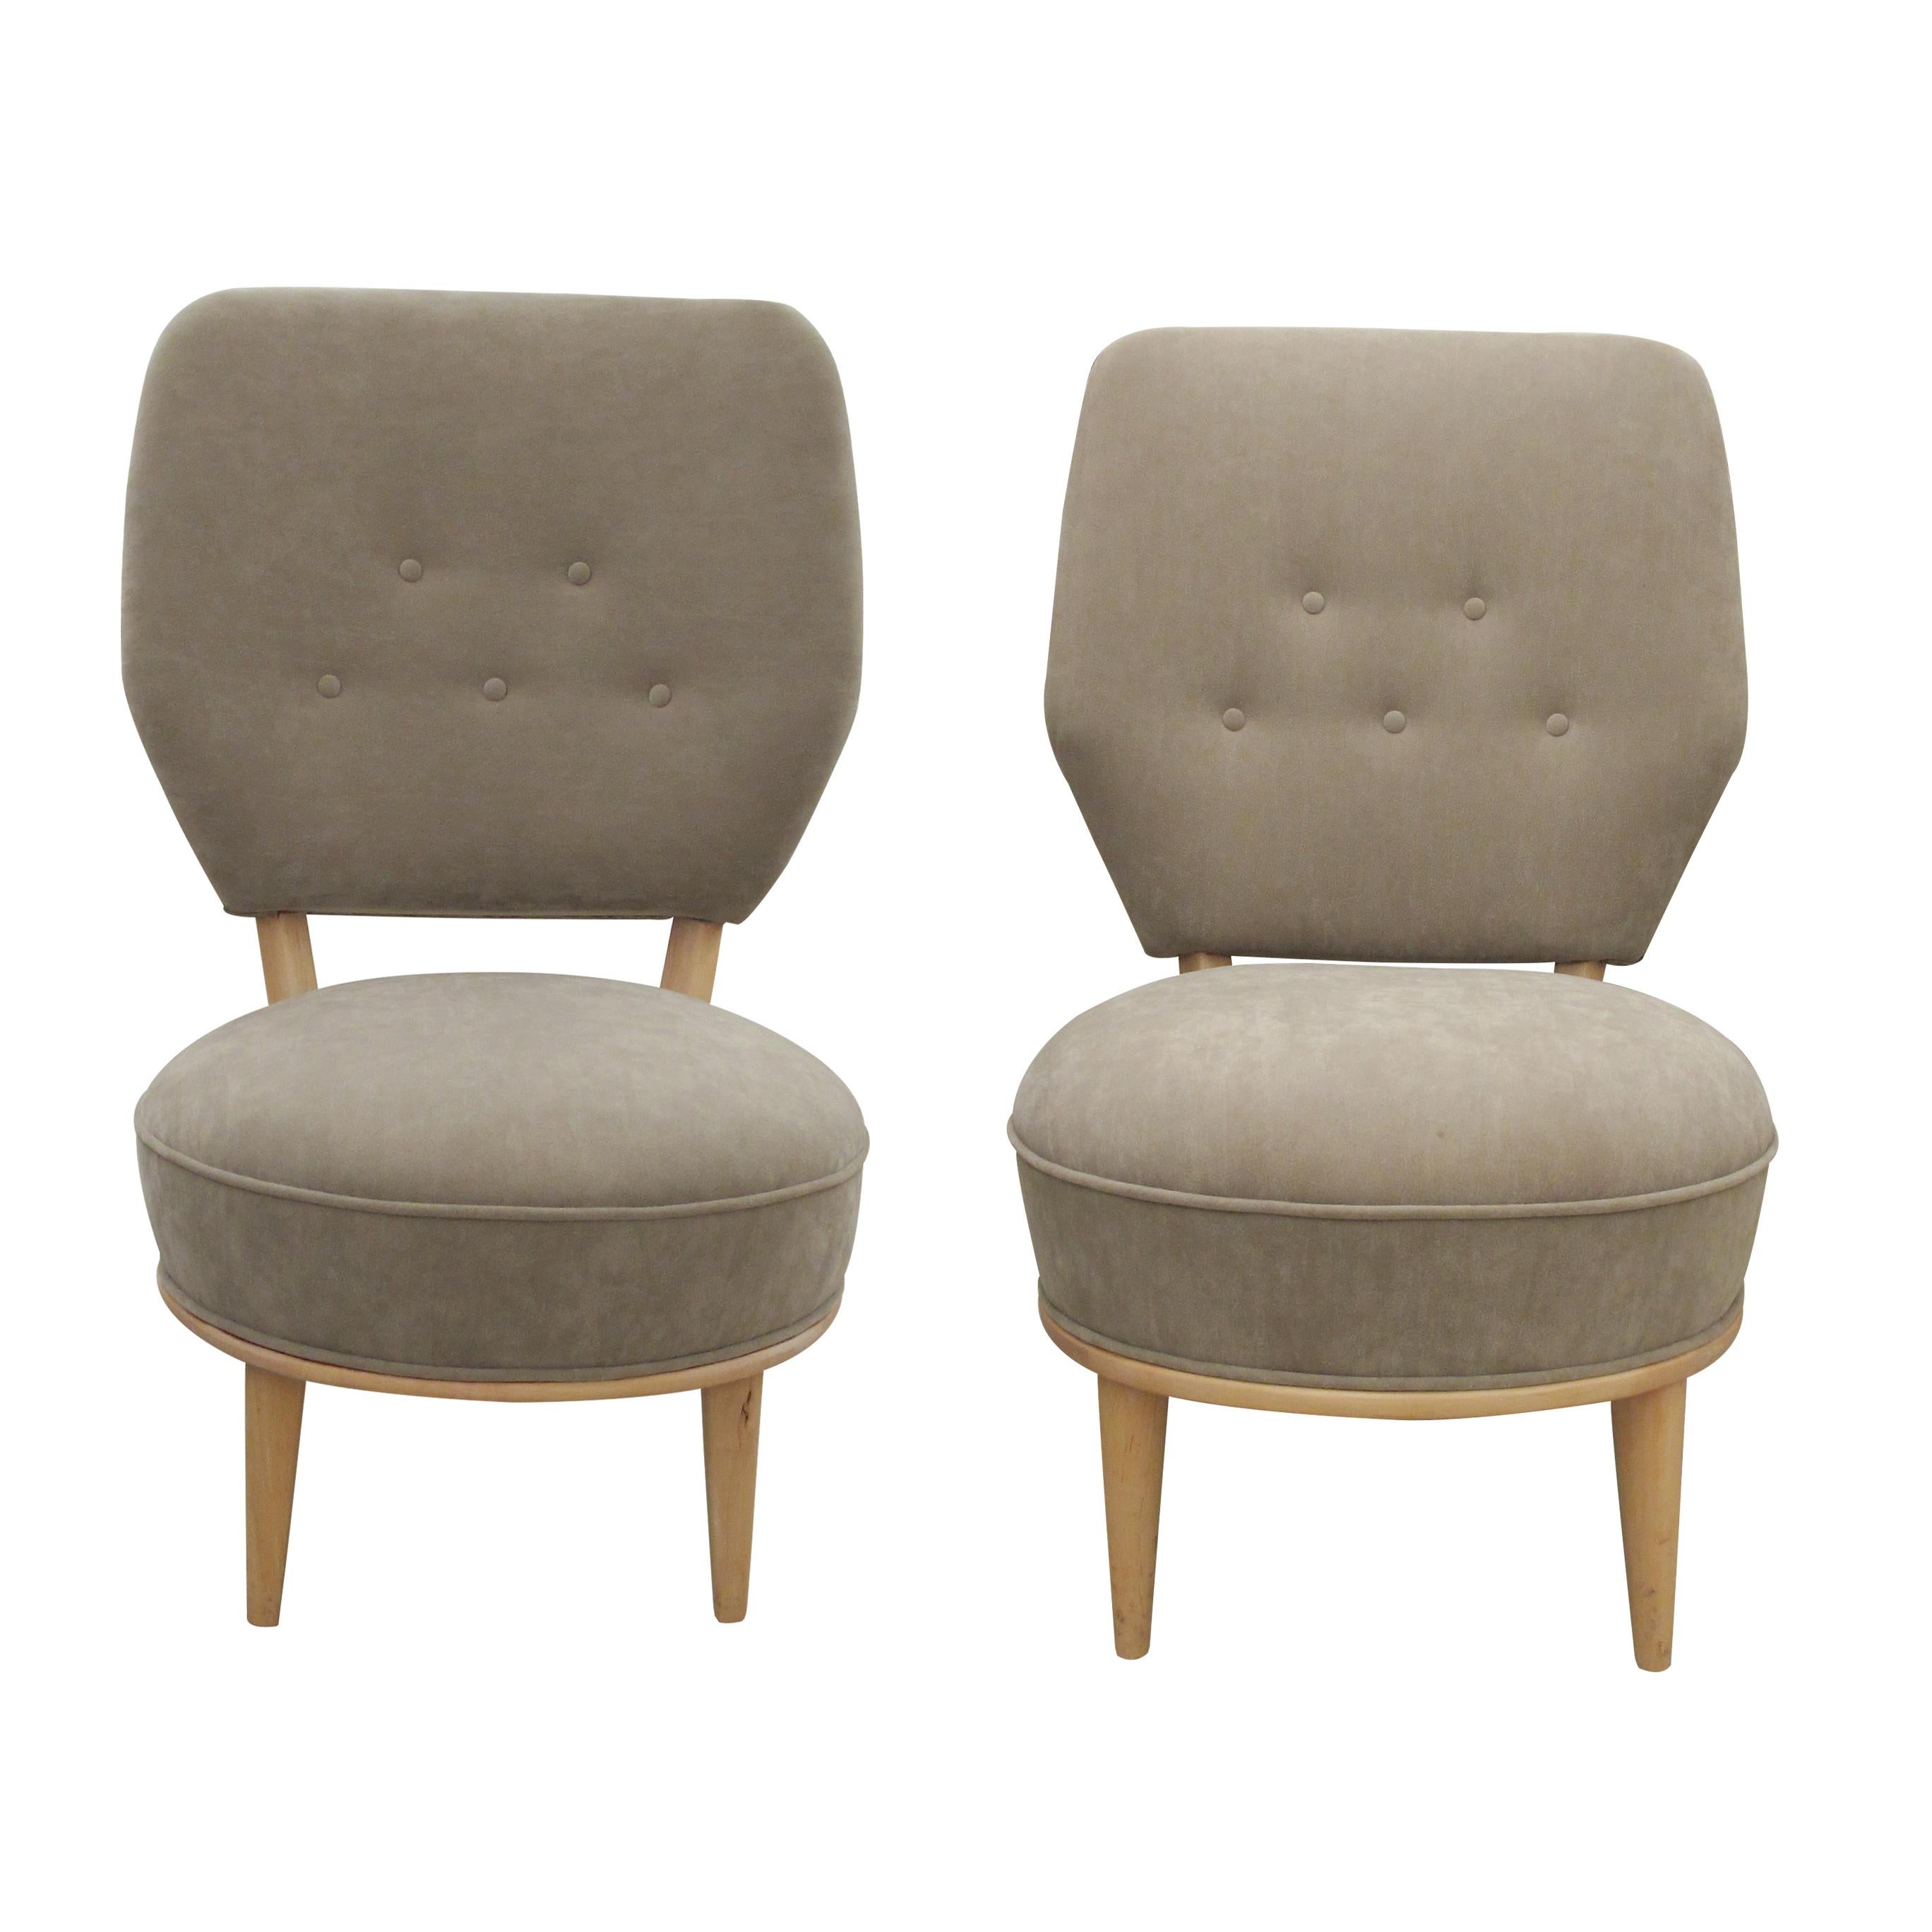 Mid-Century elegant His and Hers pair of easy chairs with a large comfortable backrest and a smooth birch wood frame with elegant curves, “His” chair is 3 cm higher than “Hers”. The chairs have been re-upholstered in a suede-like washable durable